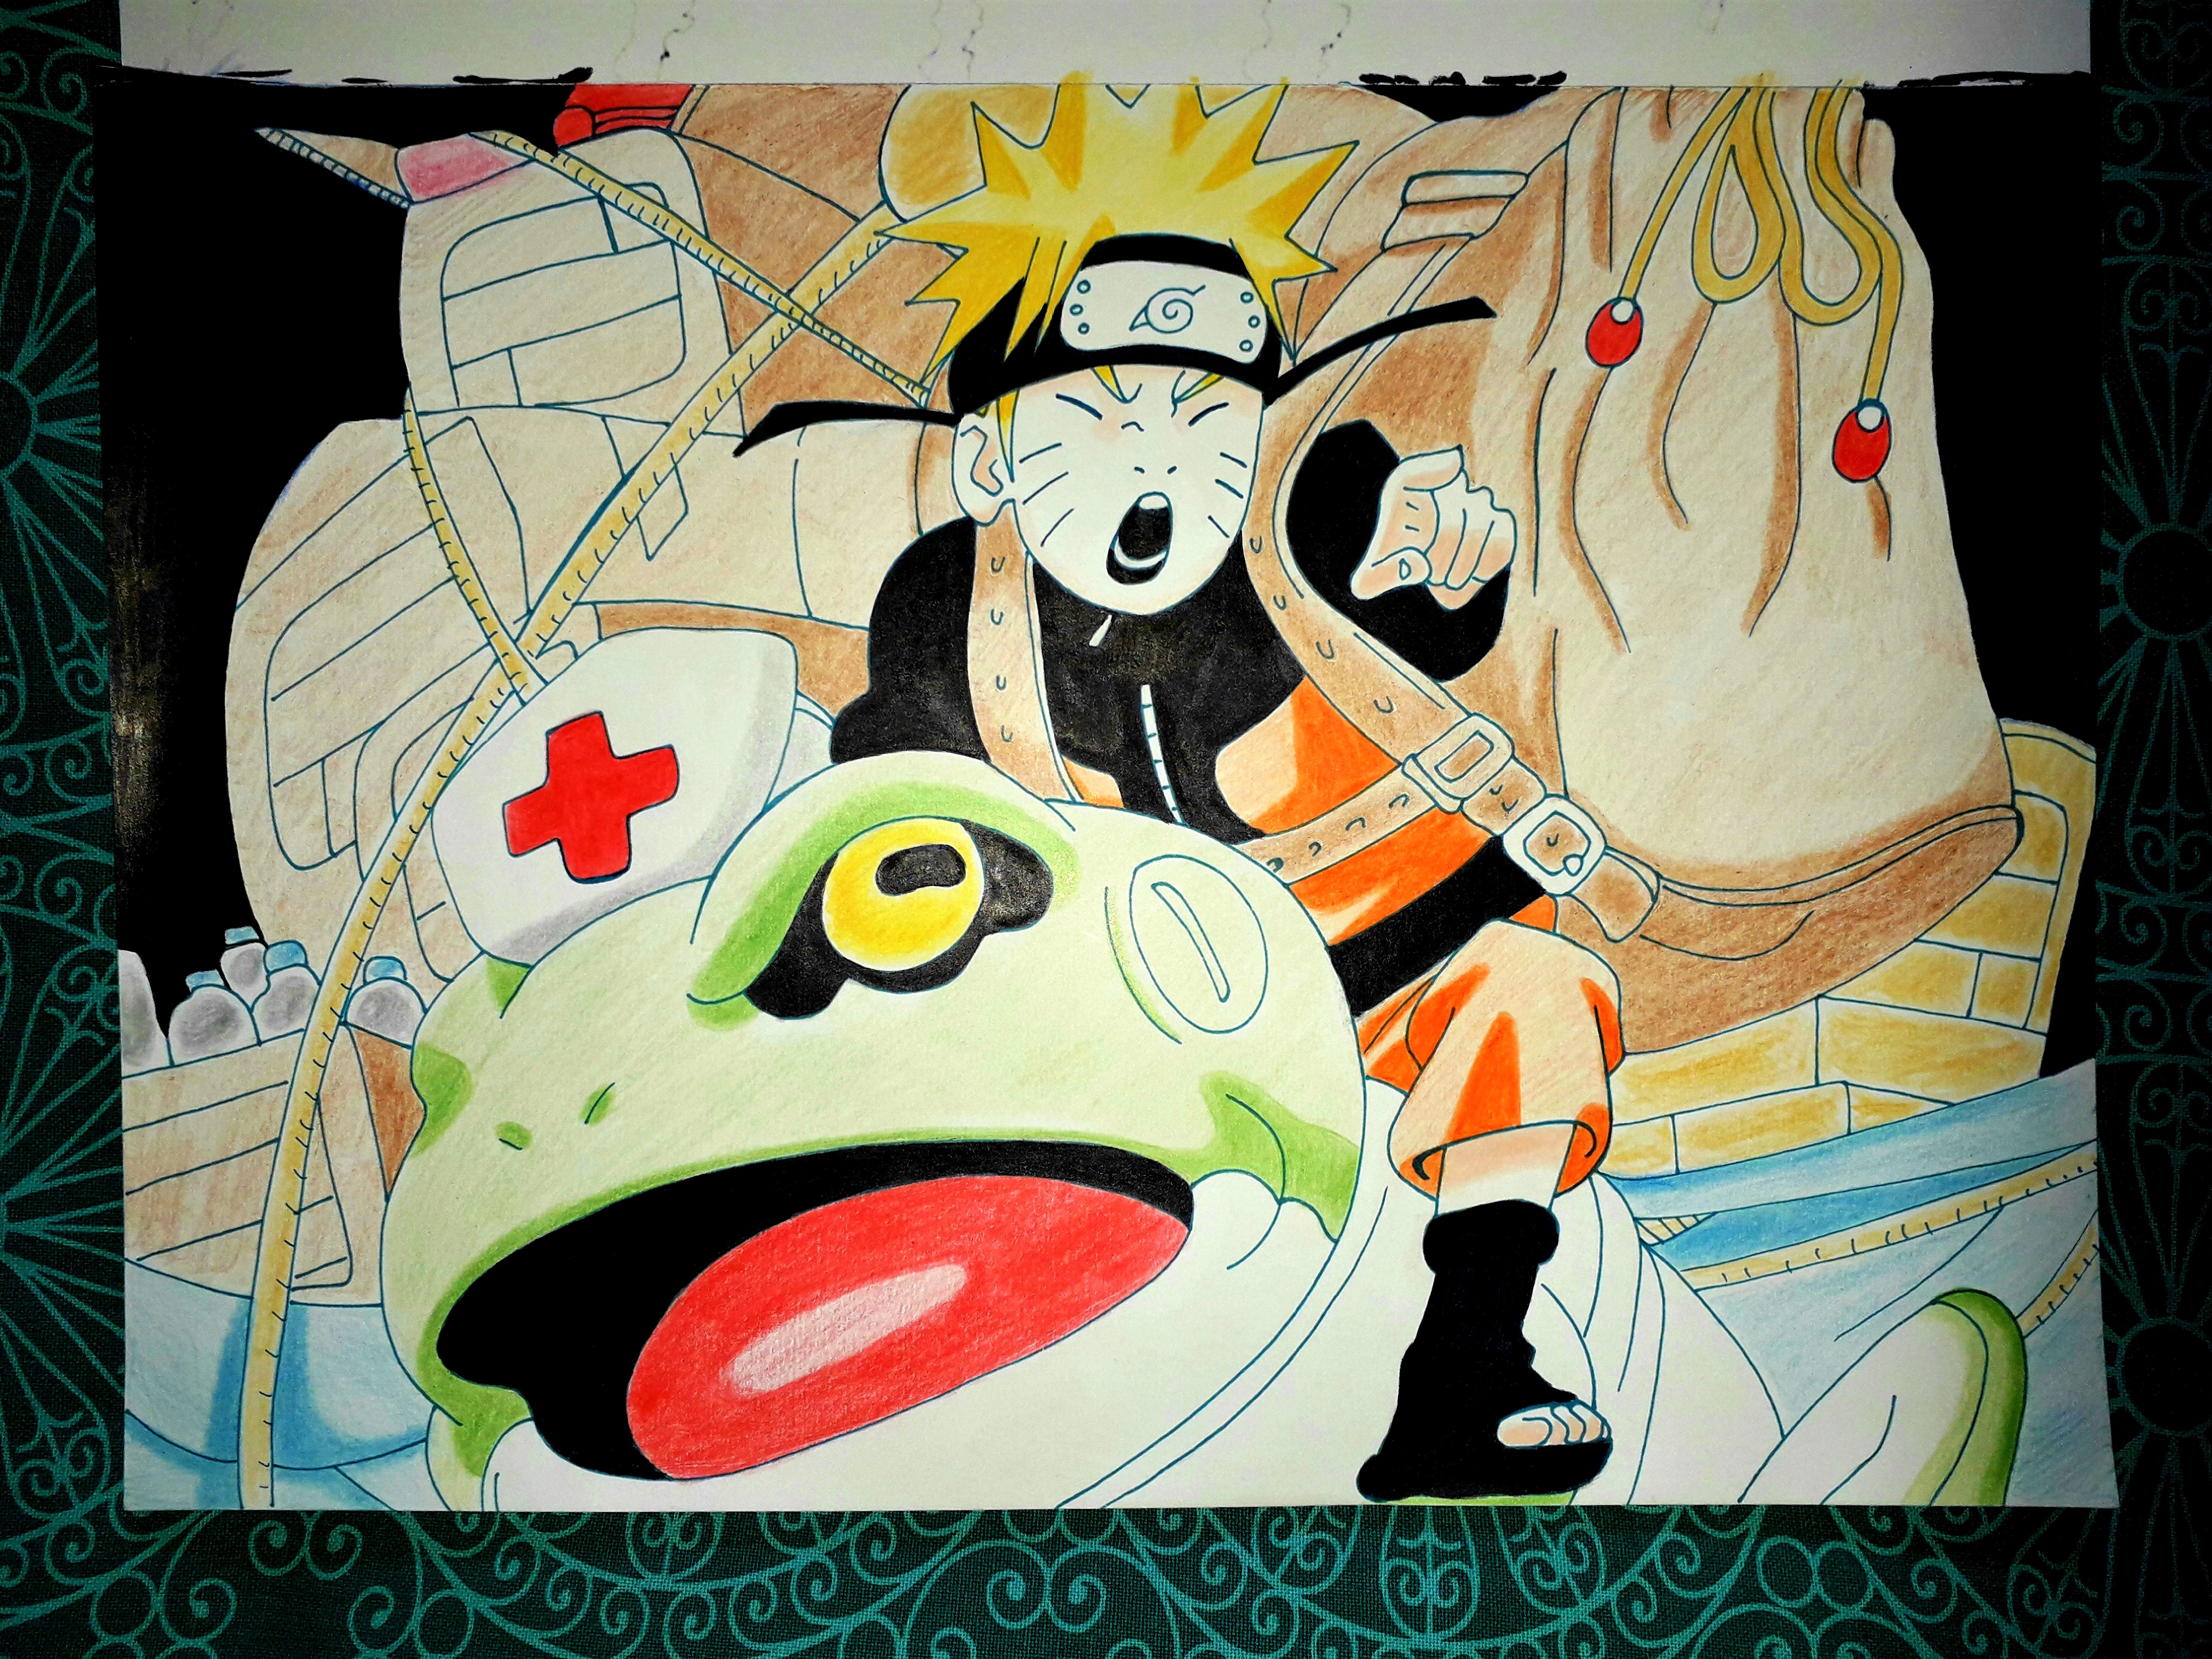 naruto and kyuubi - in color by Drawings-forever on DeviantArt